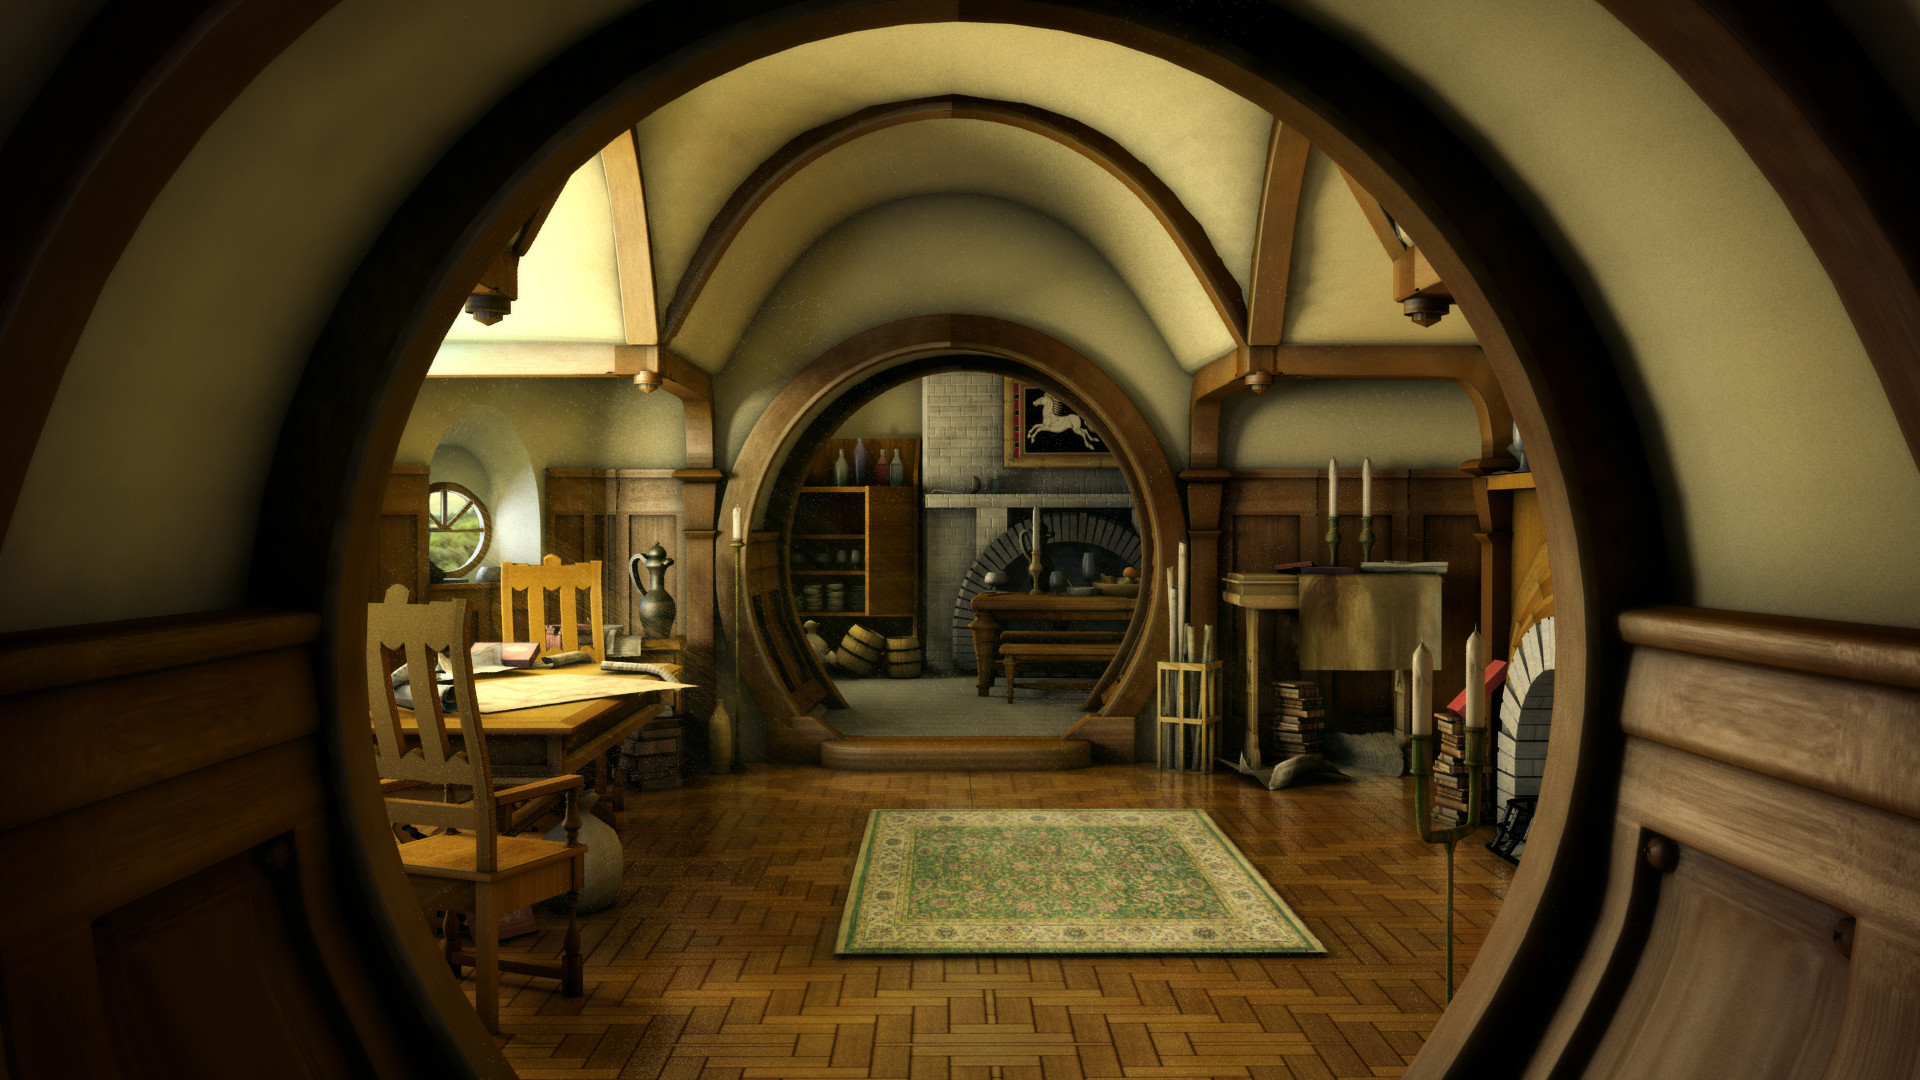 The Hobbit lord rings lotr architecture house room building fantasy interior design wallpaper 31018 WallpaperUP